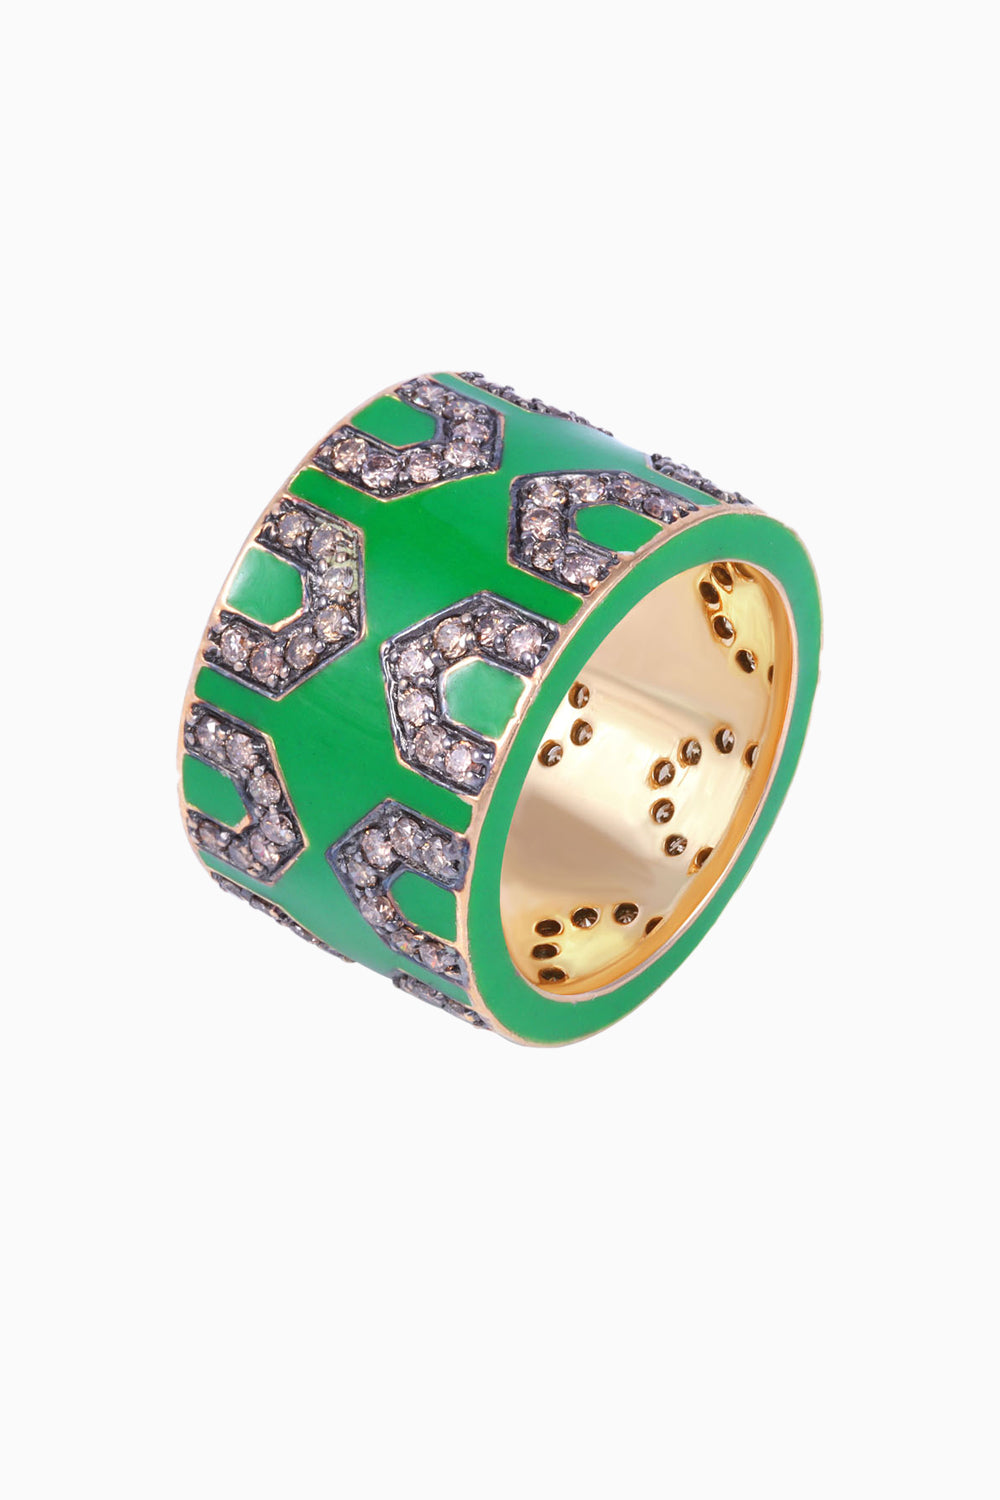 Green Enamel and Coffee 18KT Gold Diamond Ring